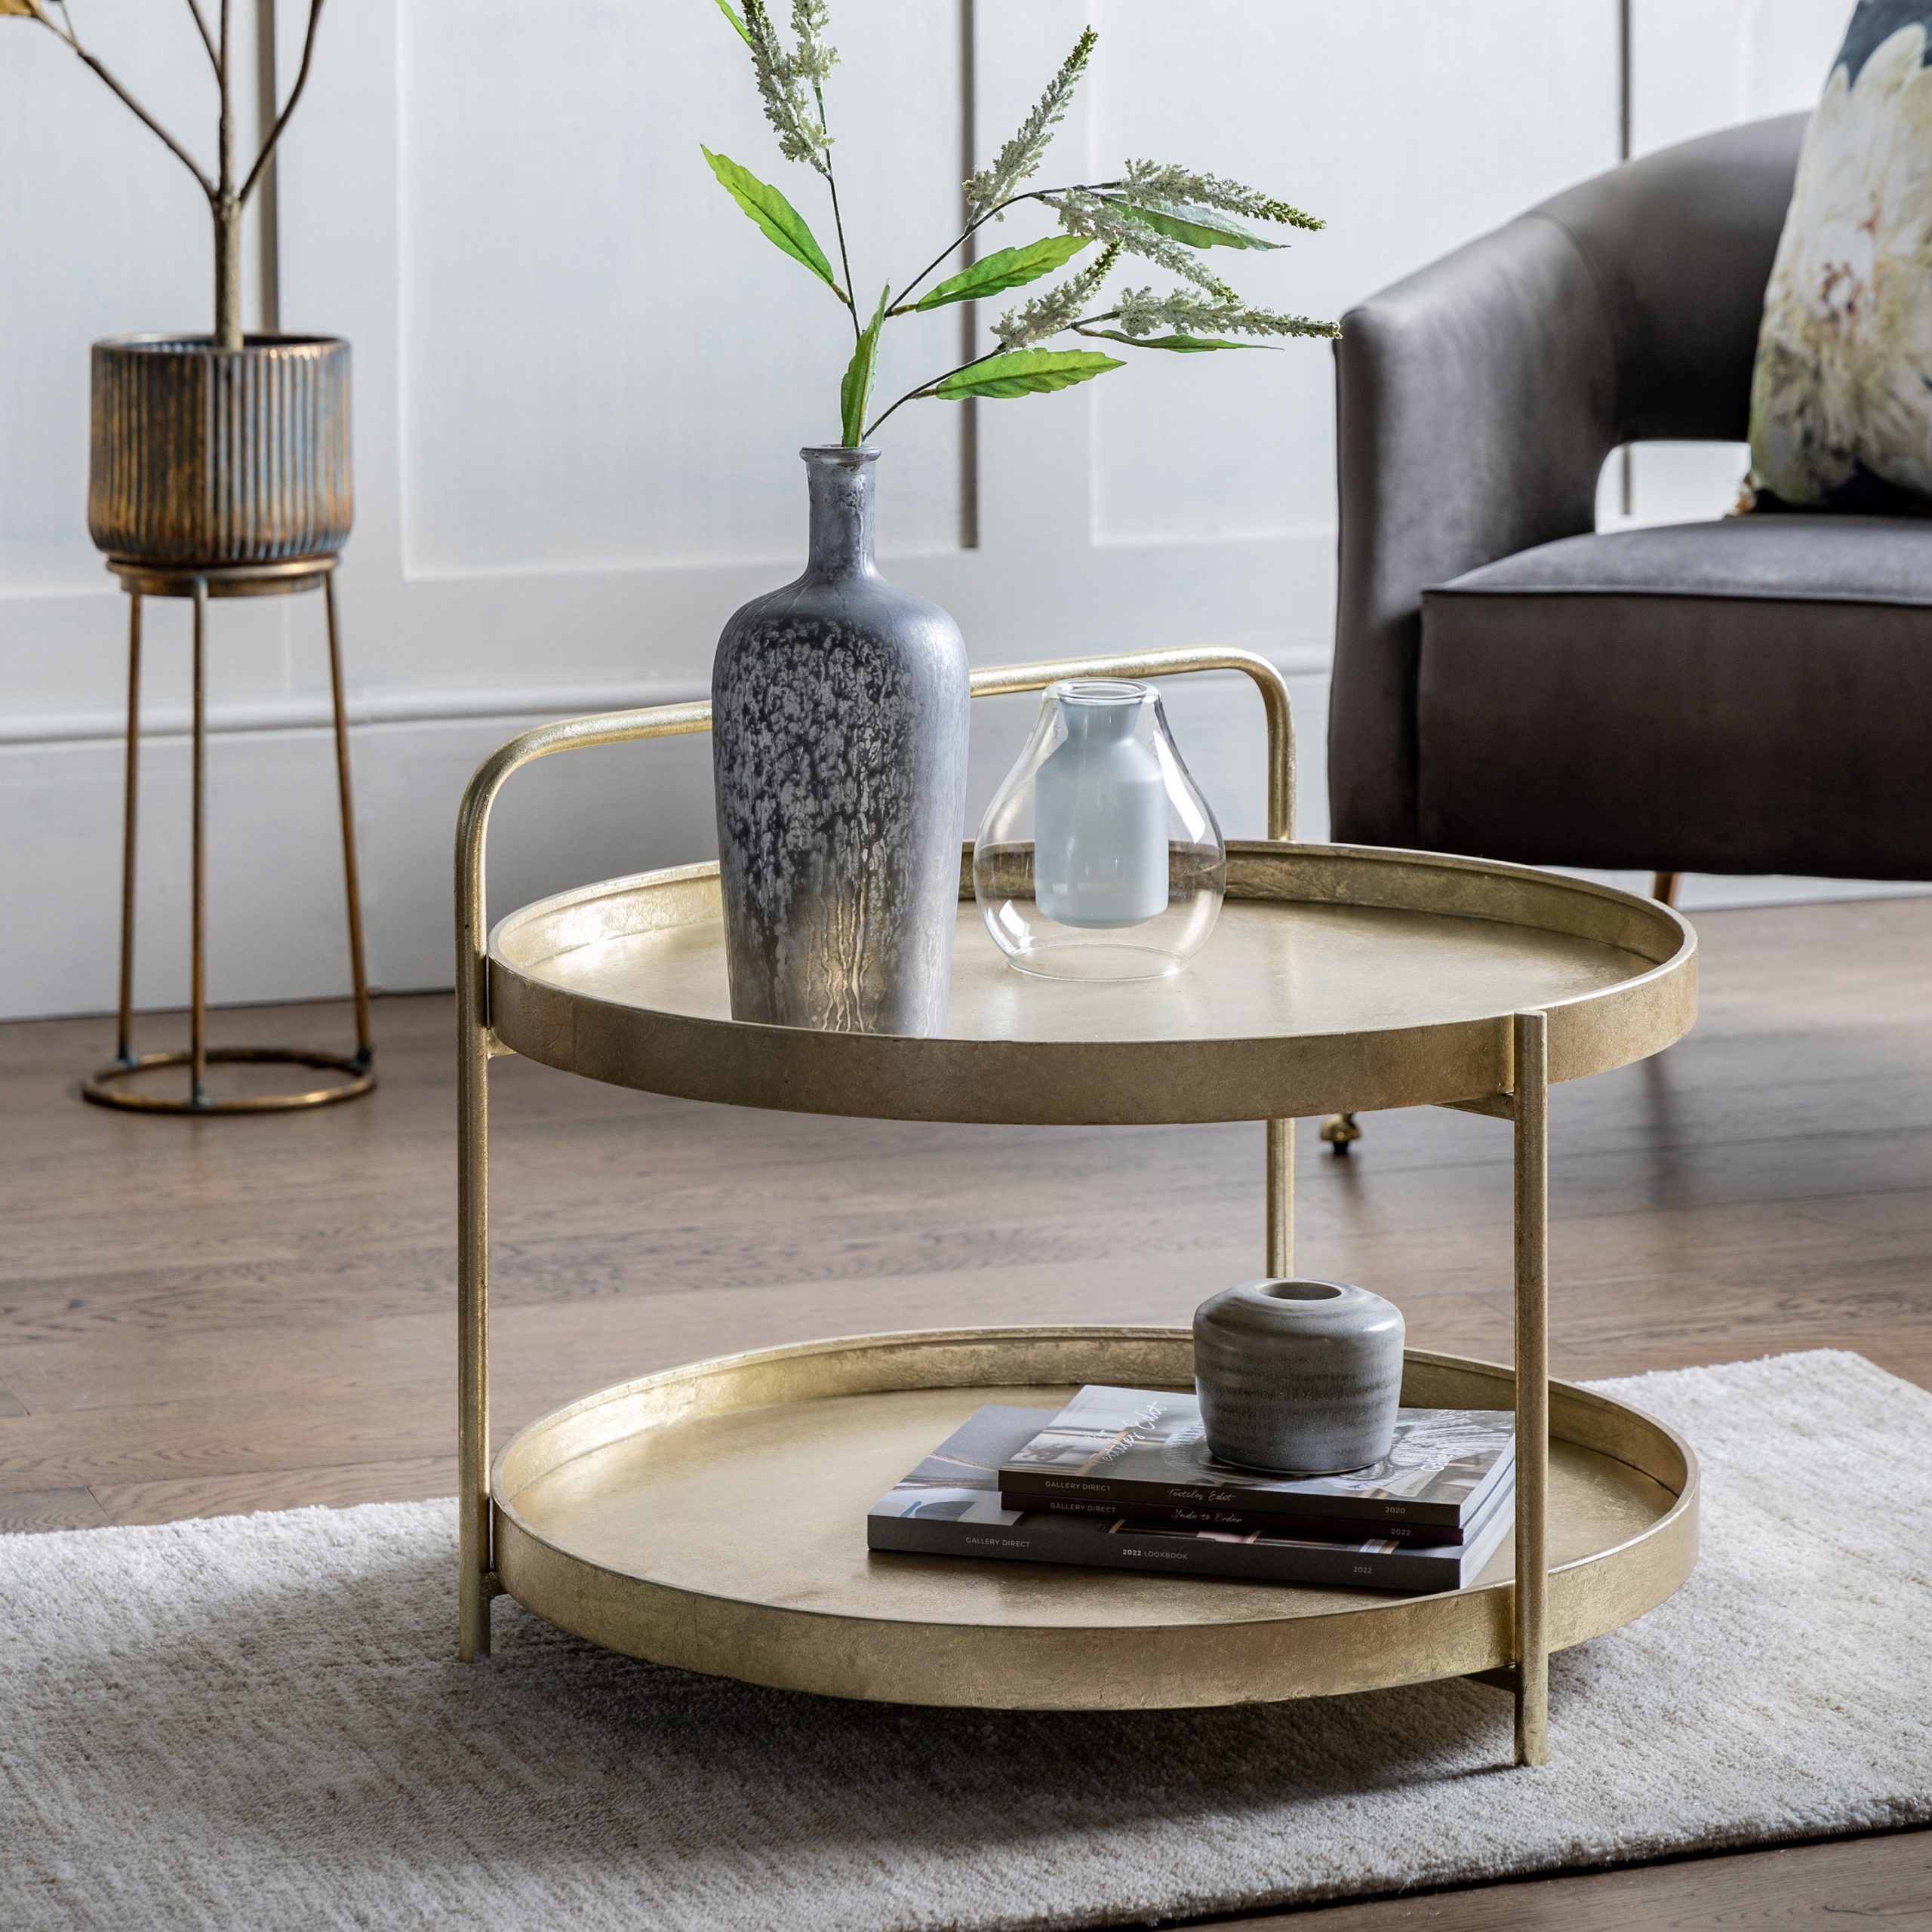 Gallery Direct 3 Legs Coffee Table With Storage & Reviews | Wayfair.co (View 11 of 15)